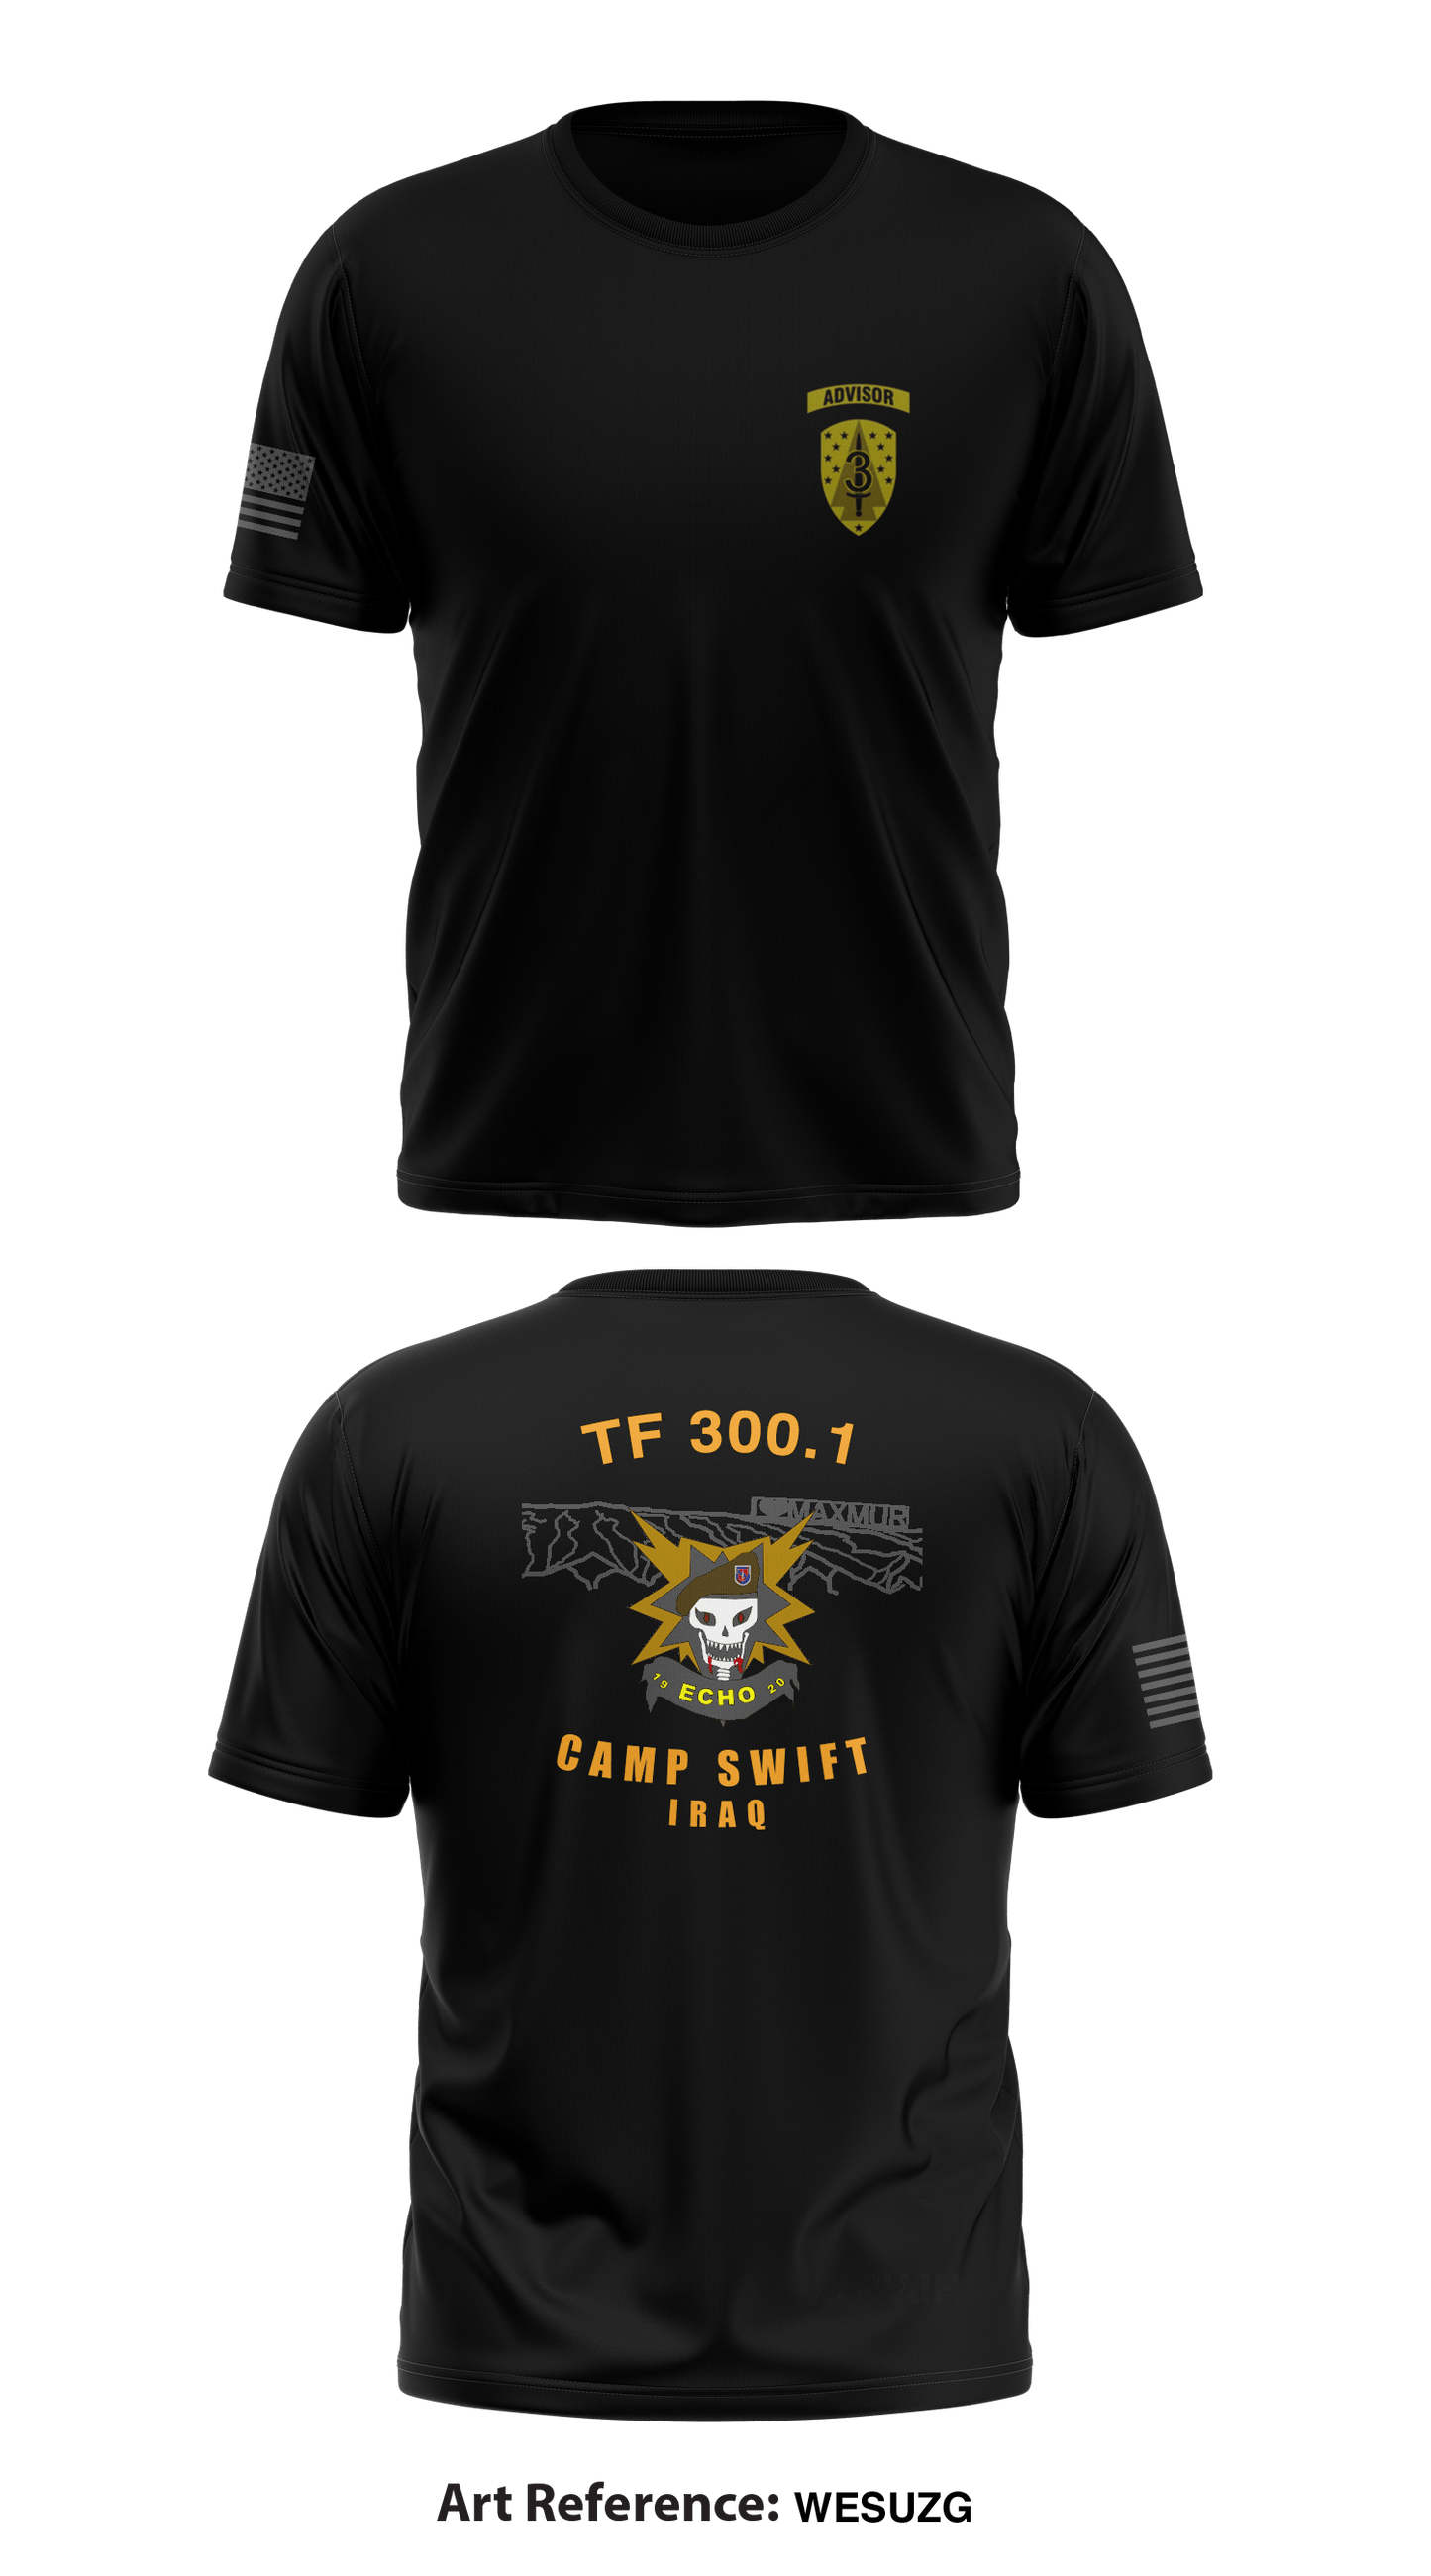 TF 300.1 Store 1 Core Men's SS Performance Tee - wESuzg